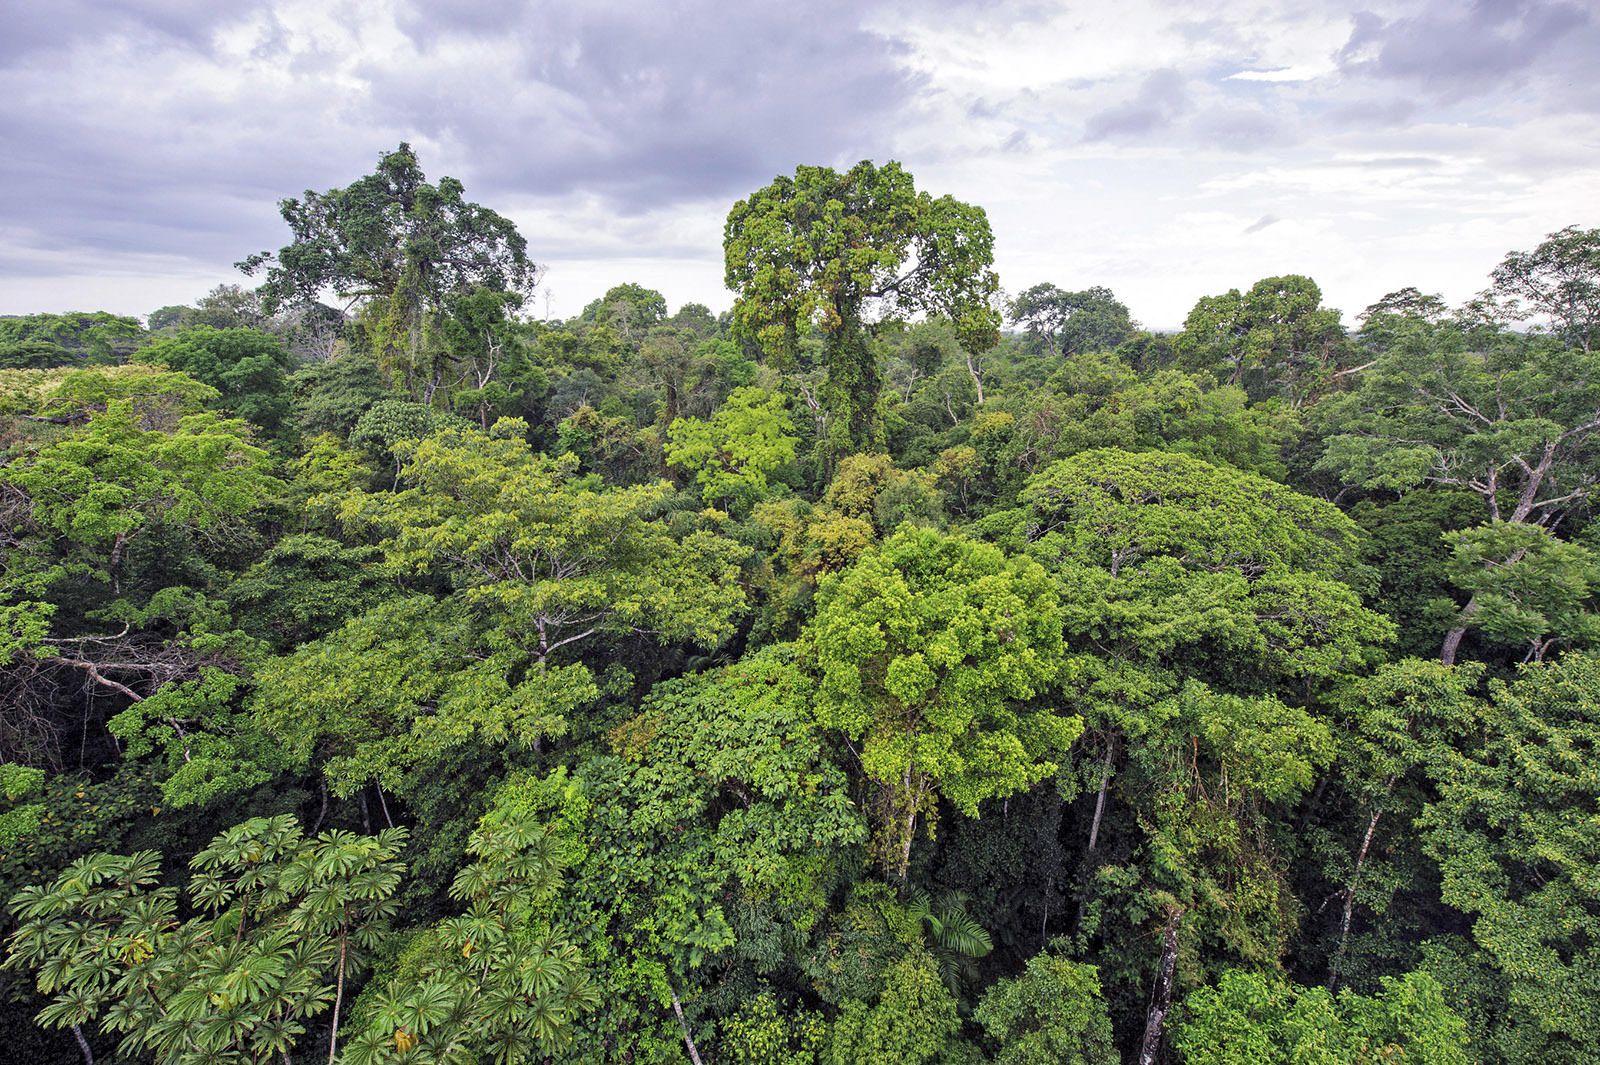 9 Rainforest Facts Everyone Should Know